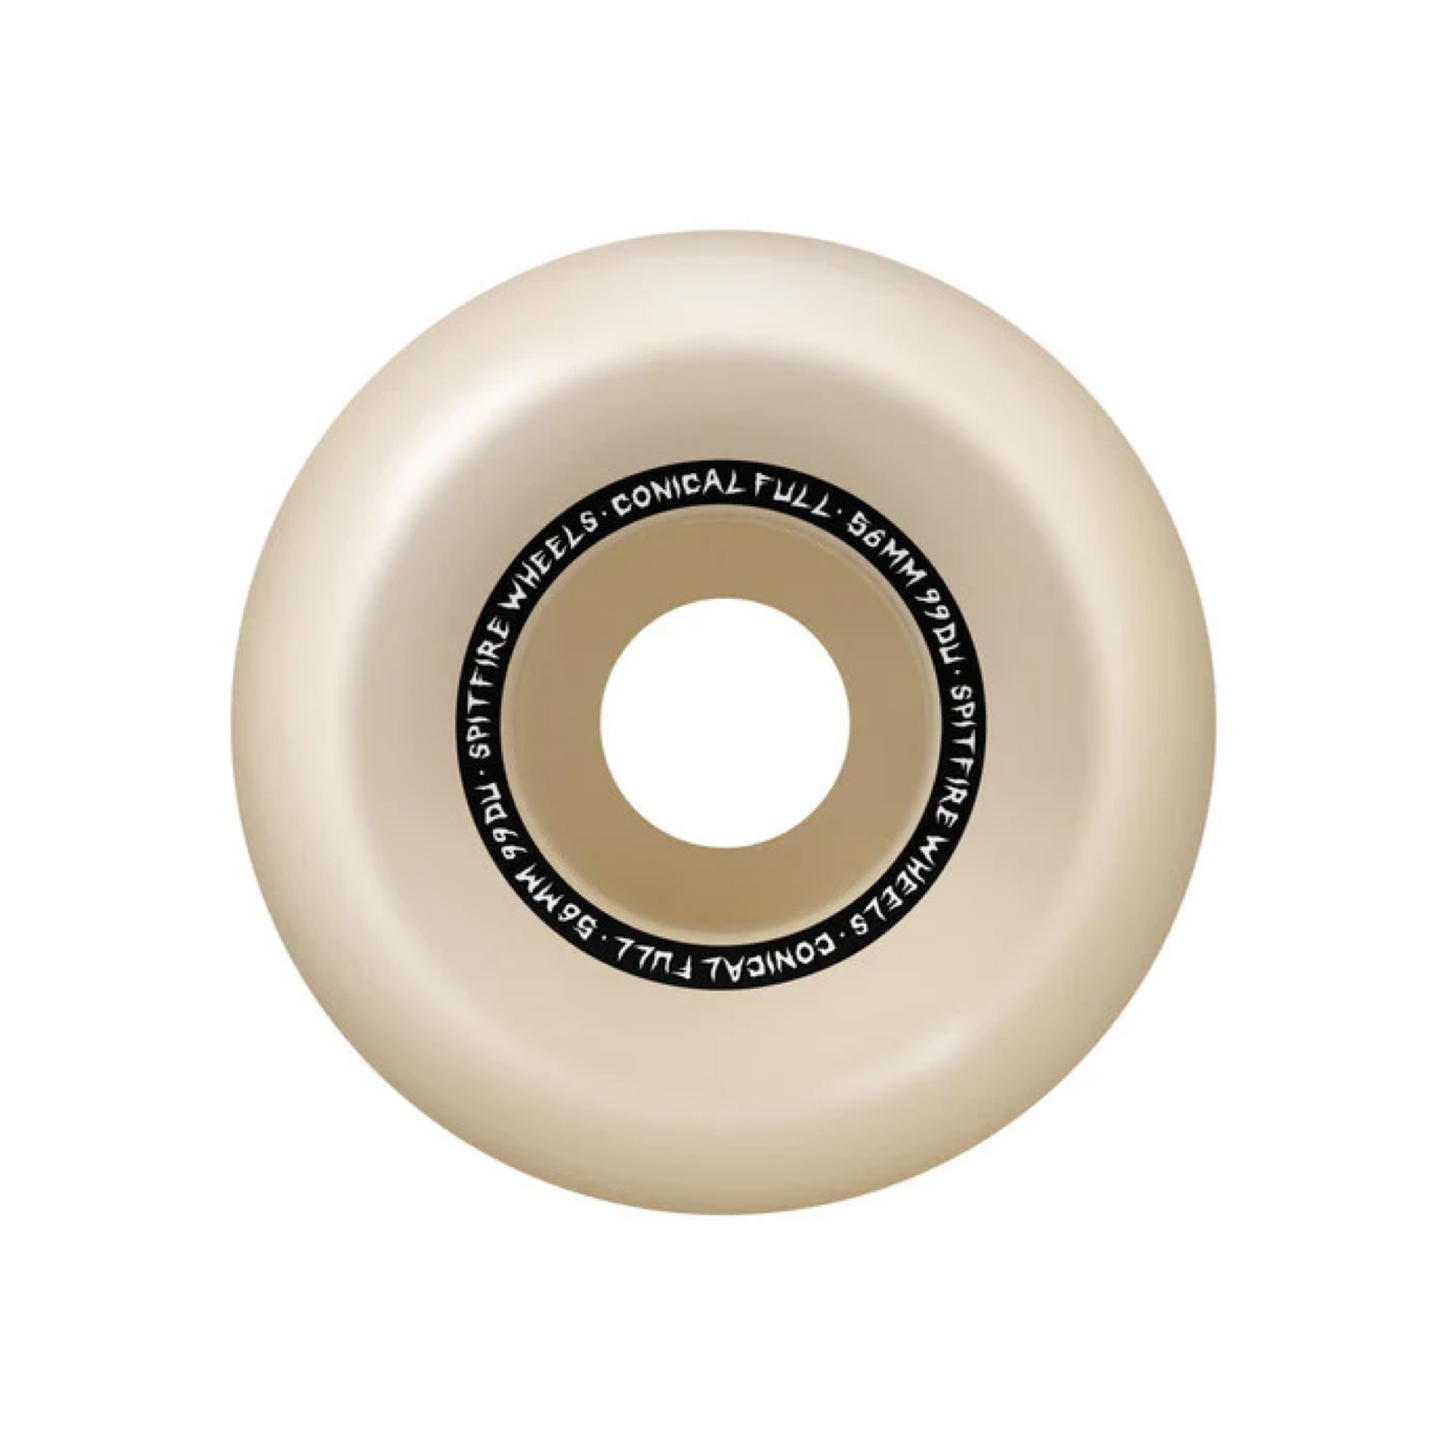 SPITFIRE DECAY FORMULA FOUR 99 FULL CONICAL WHEELS 56MM